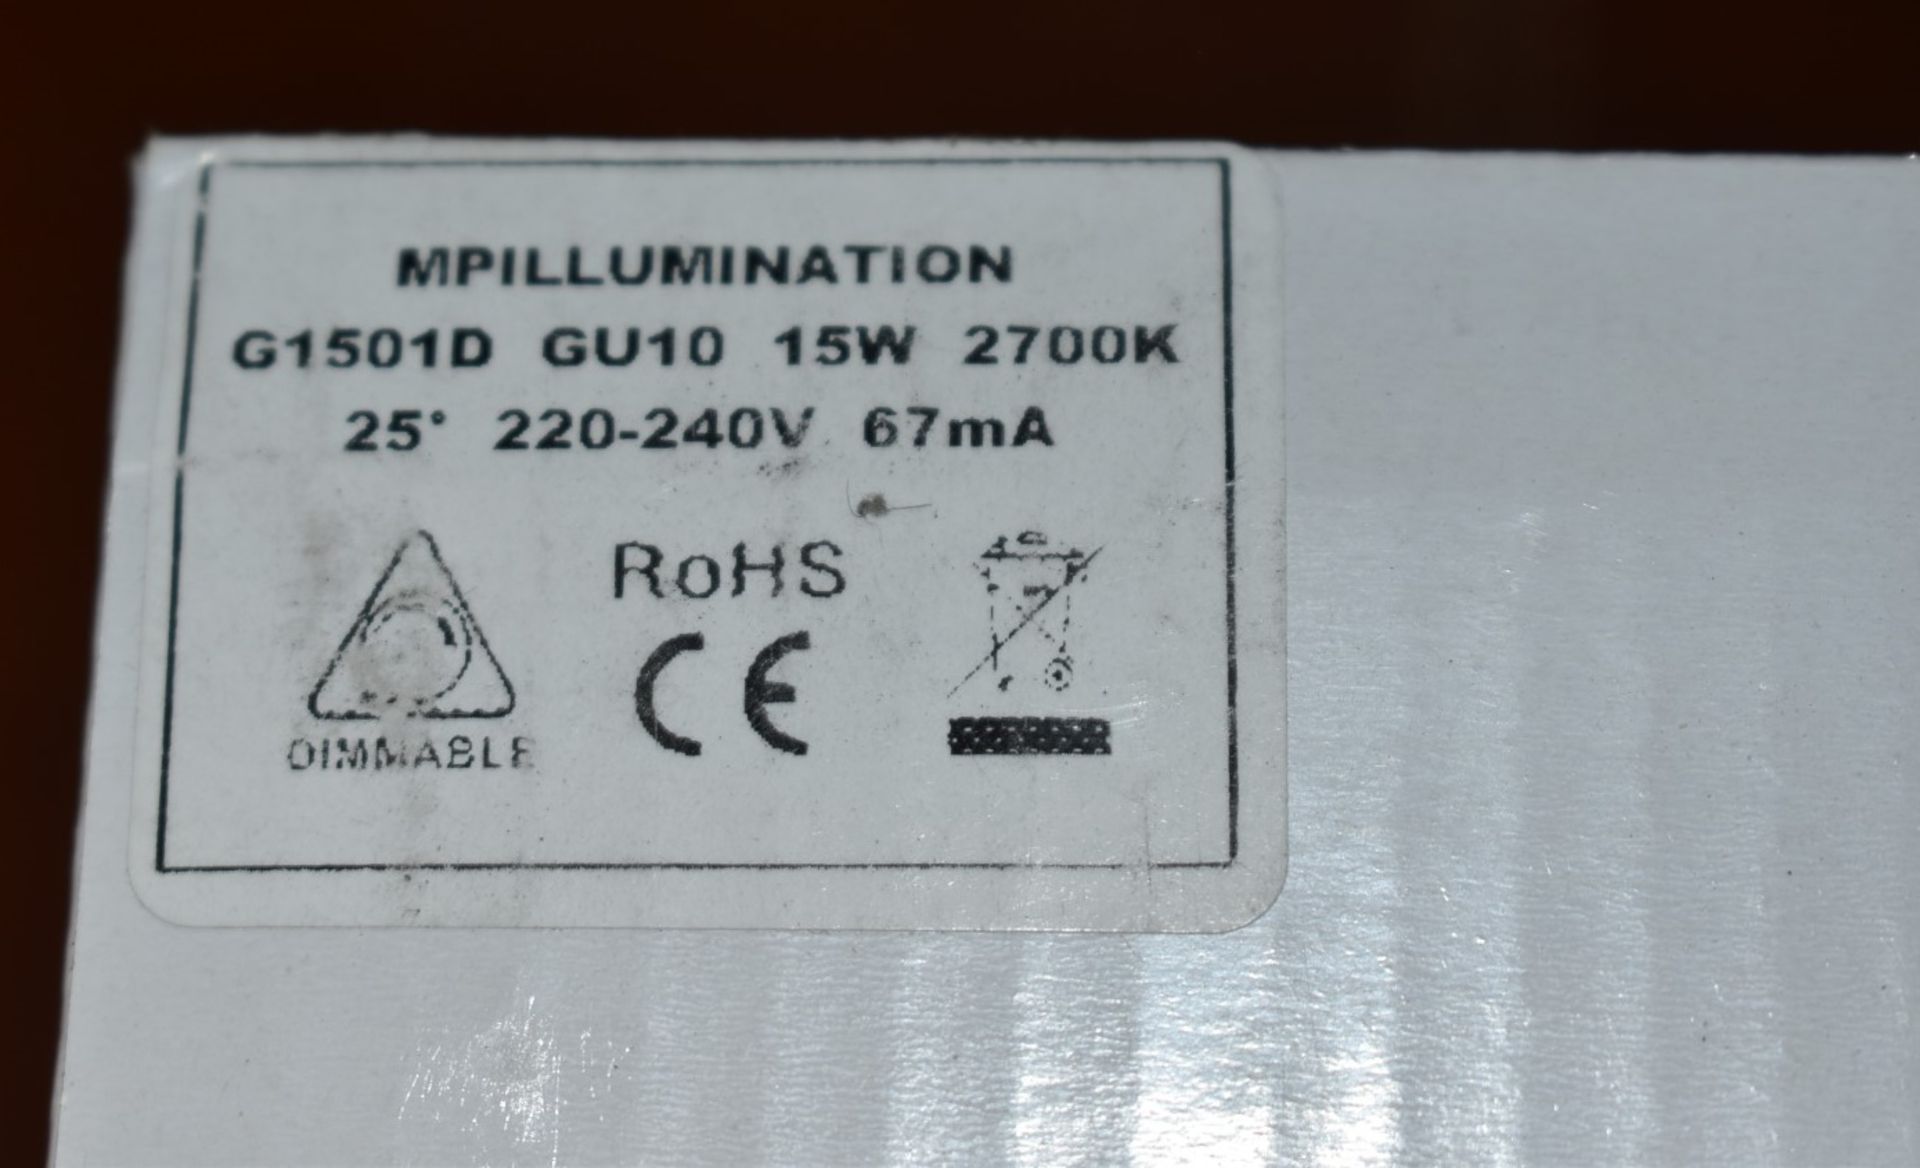 8 x MP Illuminations LED Reflector Light Bulb Fittings - New and Boxed - GU10 15W 2700K - Image 4 of 7